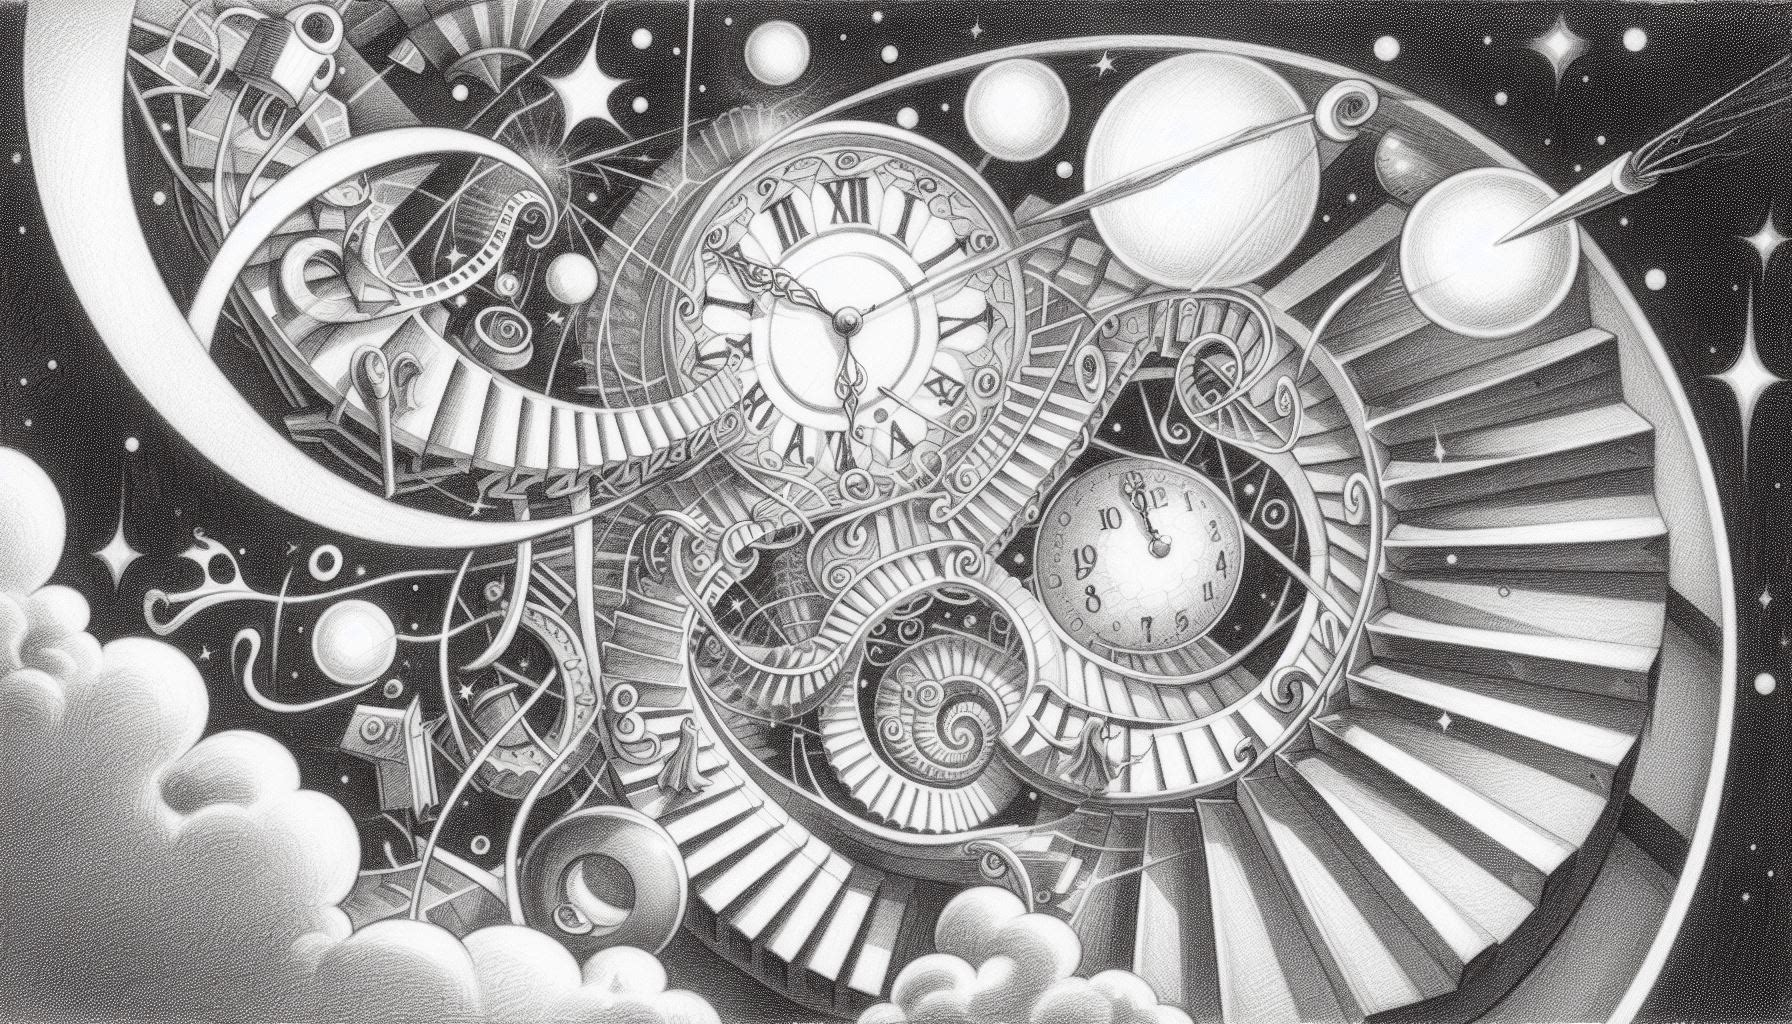 An AI-generated pencil-drawn sketch of a dream sequence. A spiral staircase descends into a clock face, surrounded by planets, clouds and stars.
